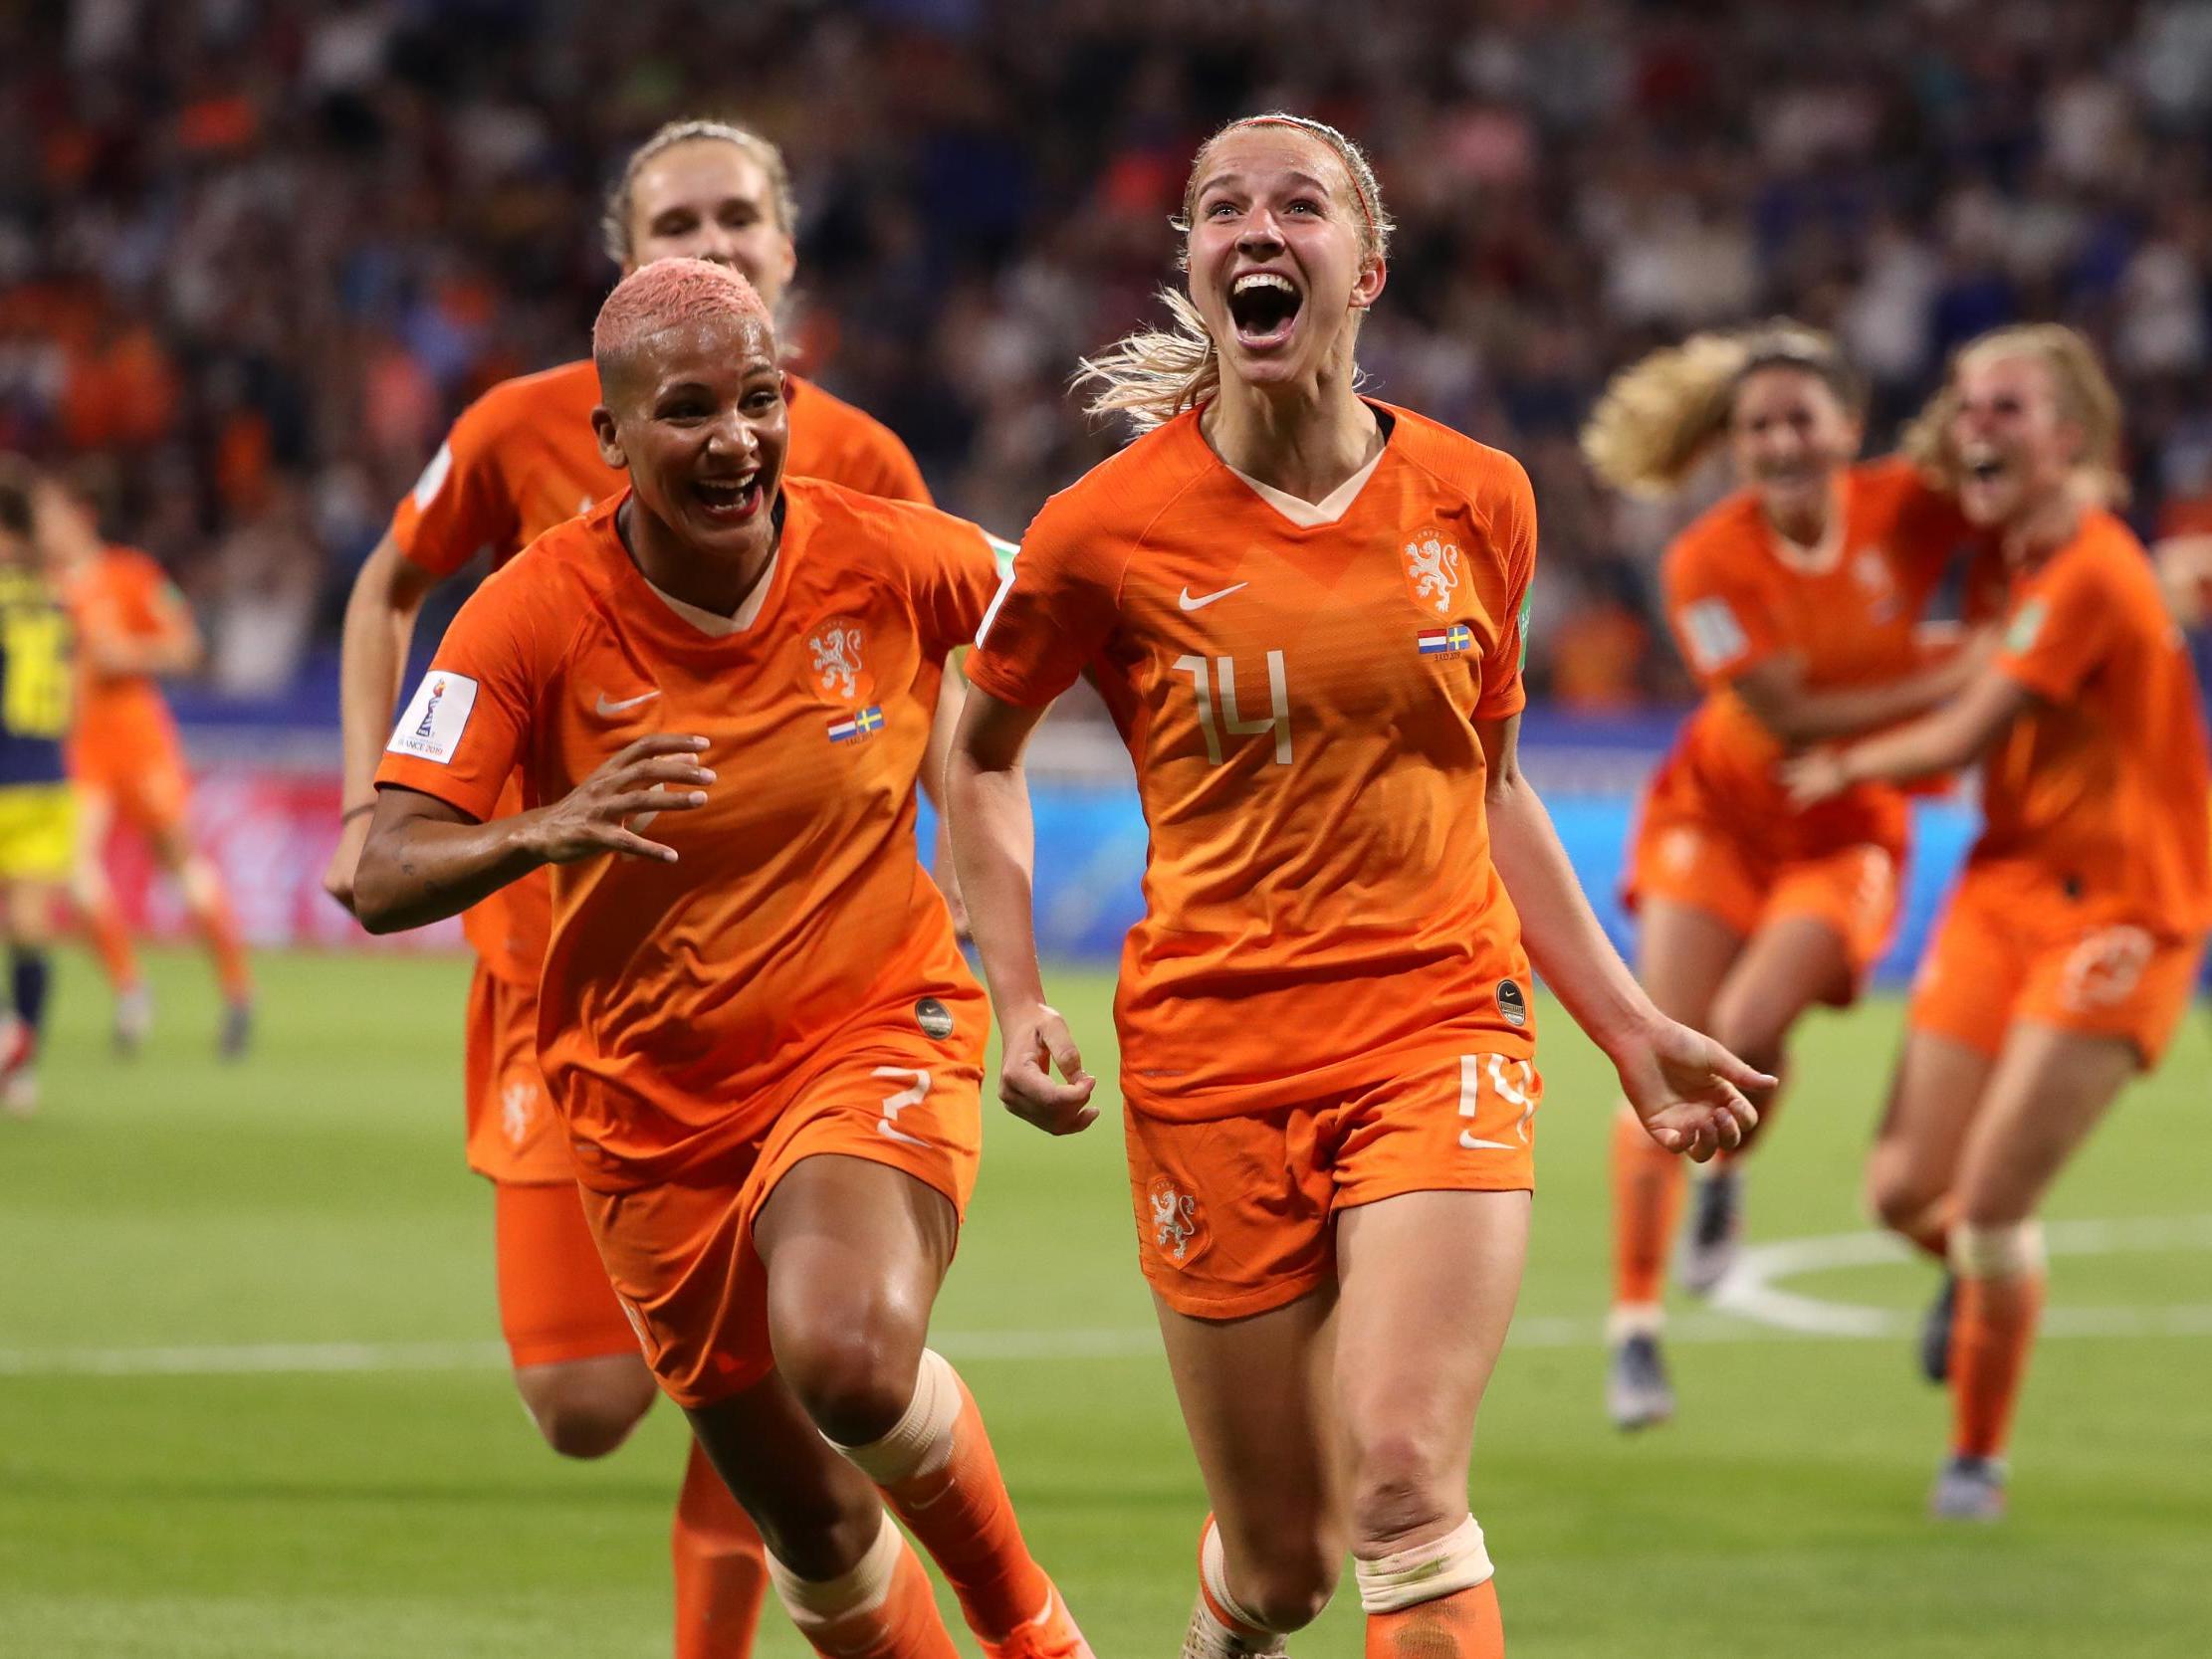 USA vs Netherlands prediction: How will Women's World Cup final play